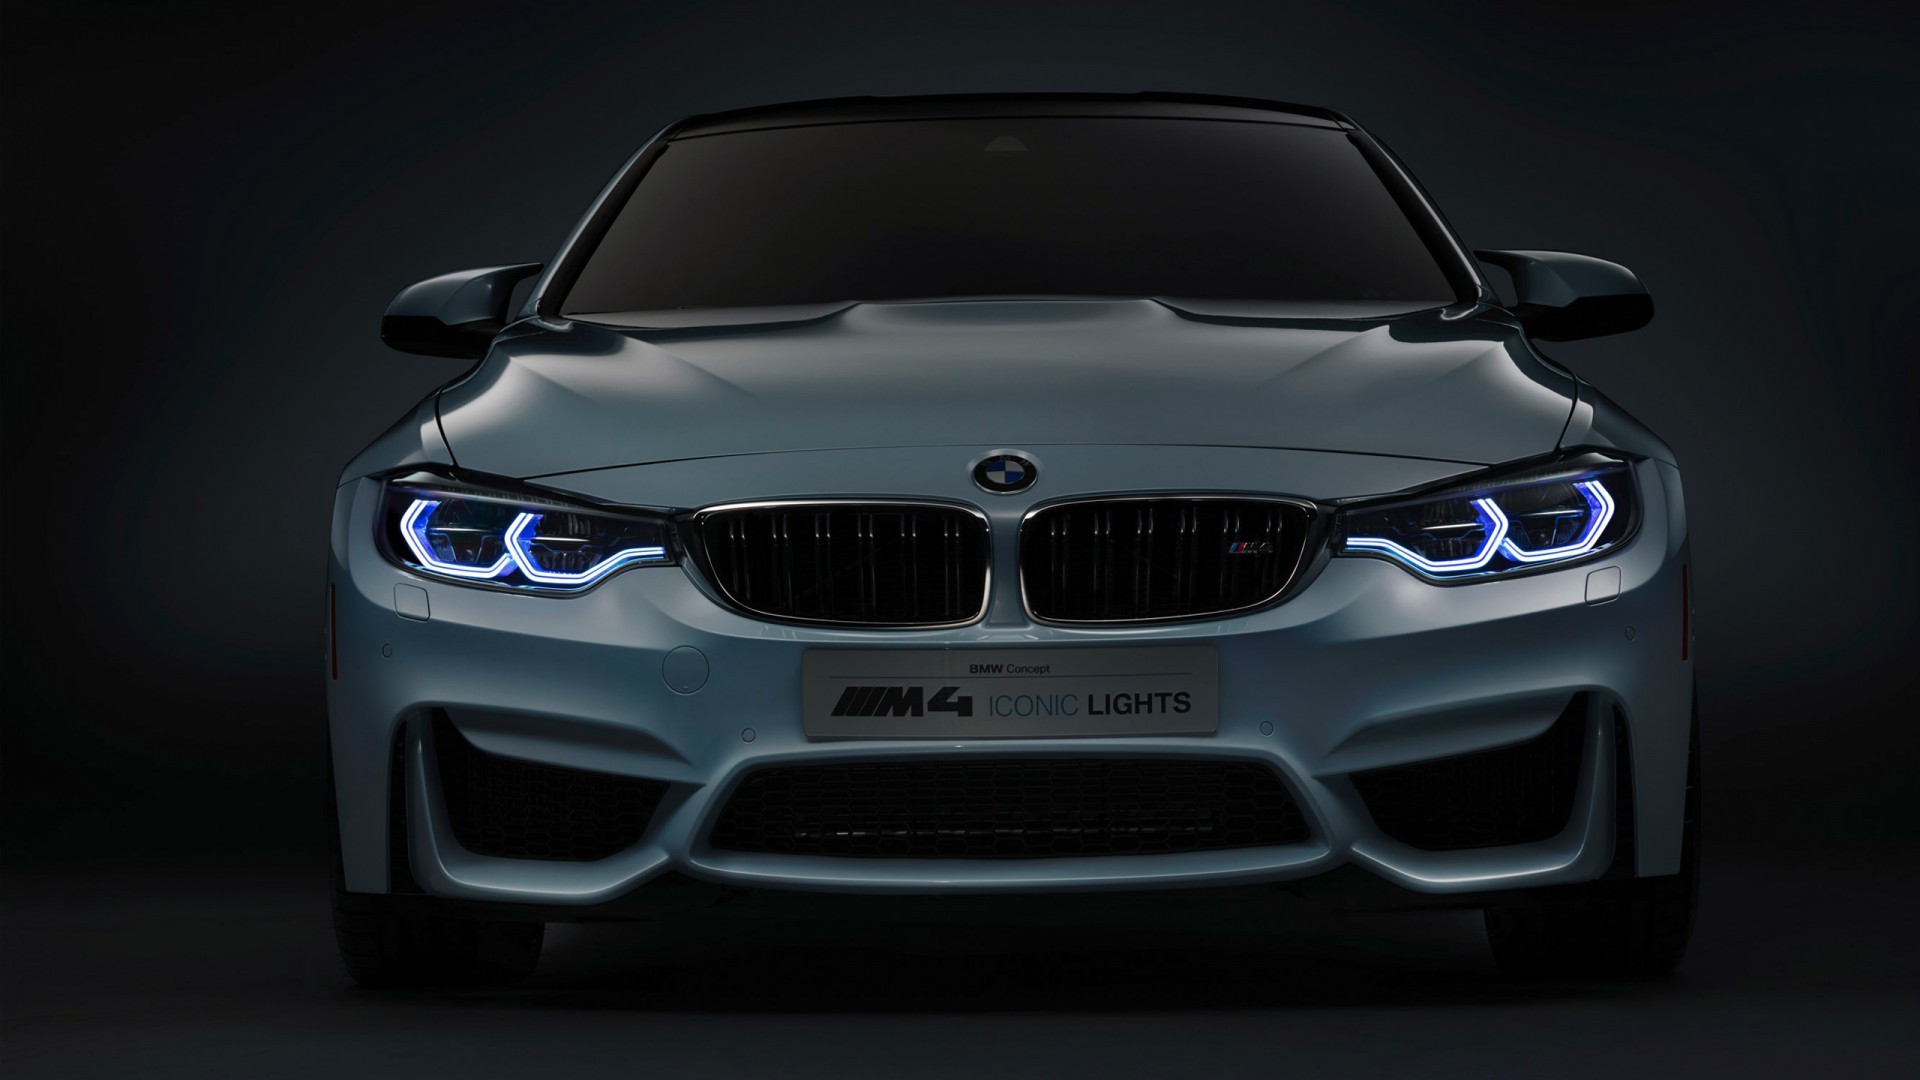 BMW M4 Coupe front view